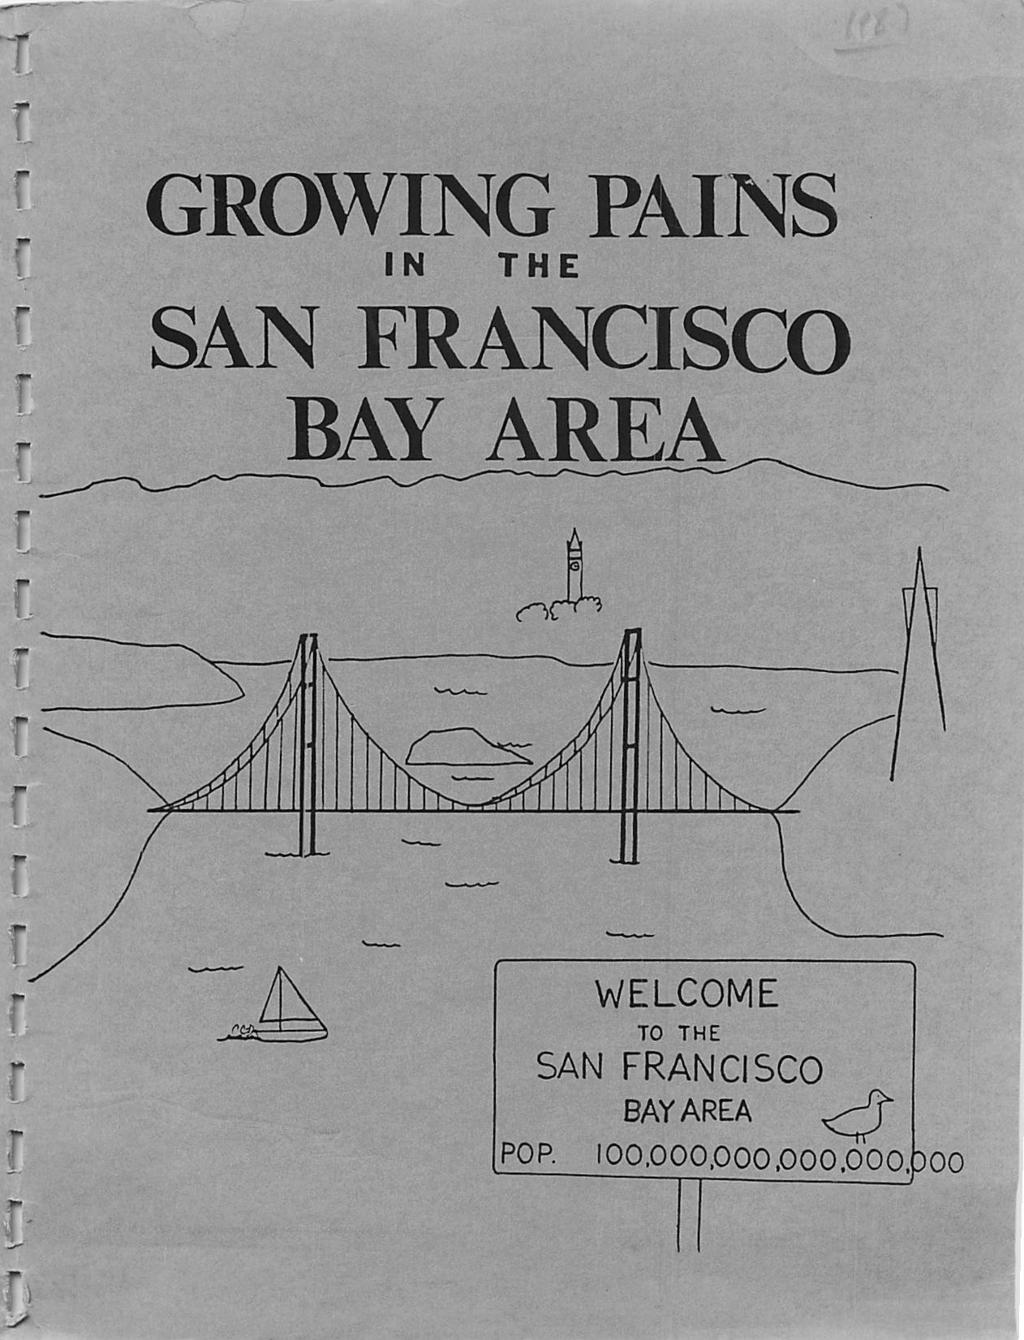 GROWING PAINS SAN FRANCISCO BAY AREA WELCOME TO THE